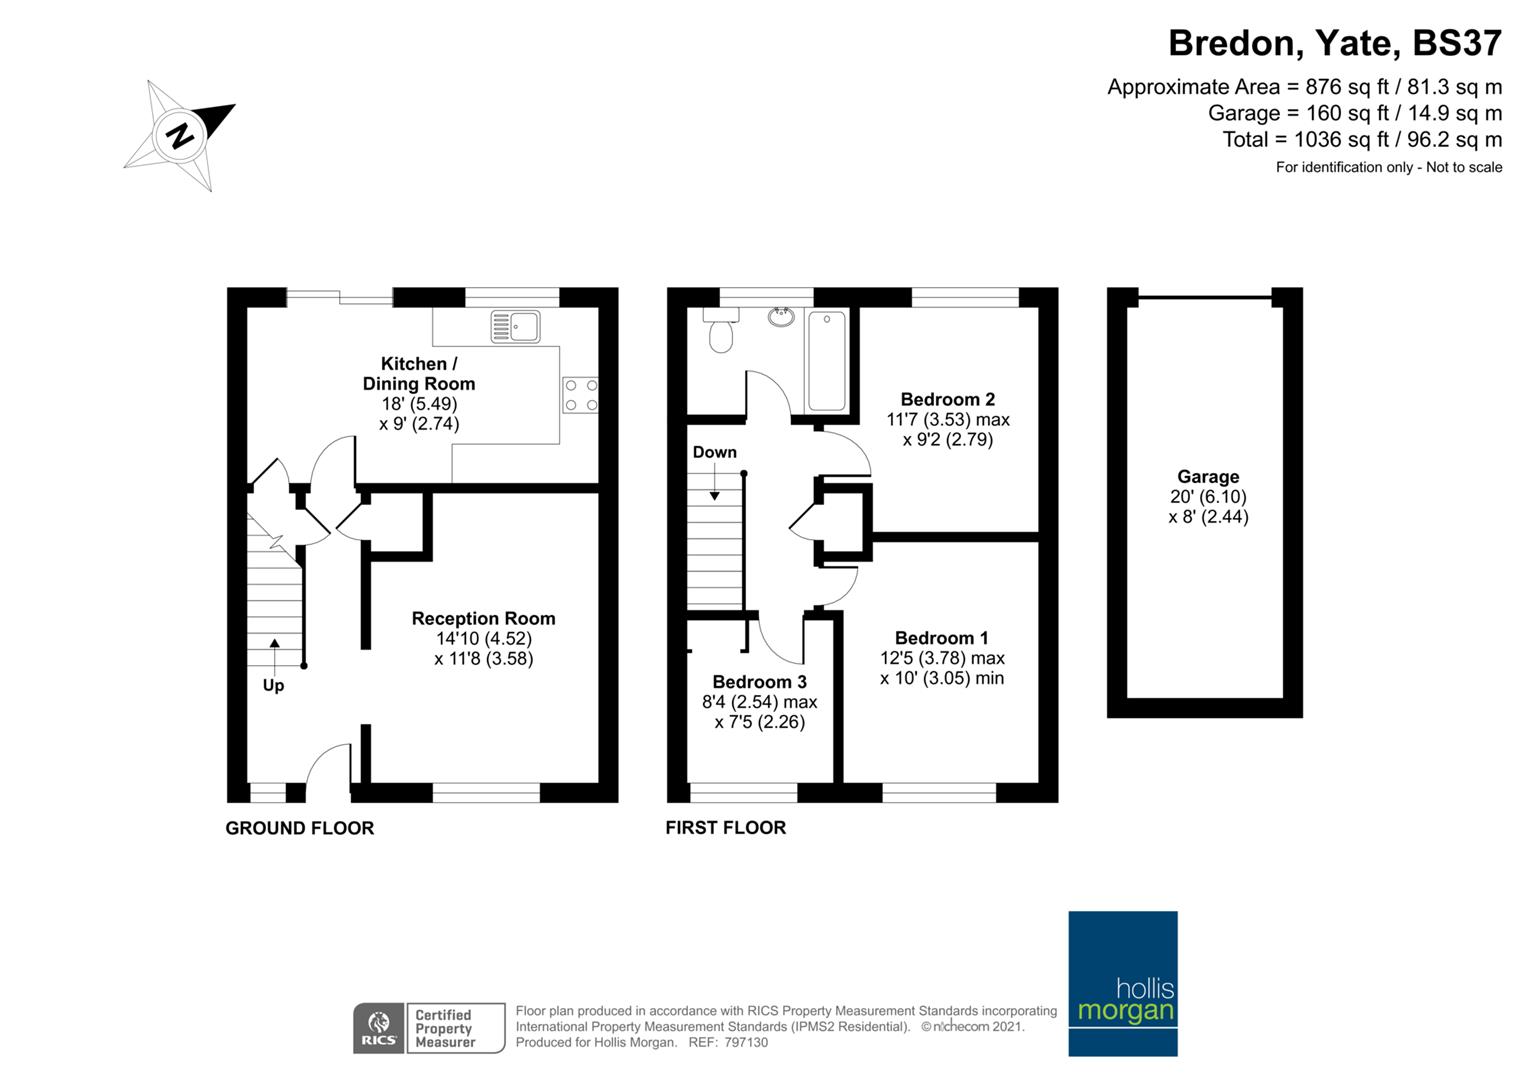 Floorplans For HOUSE FOR UPDATING - YATE